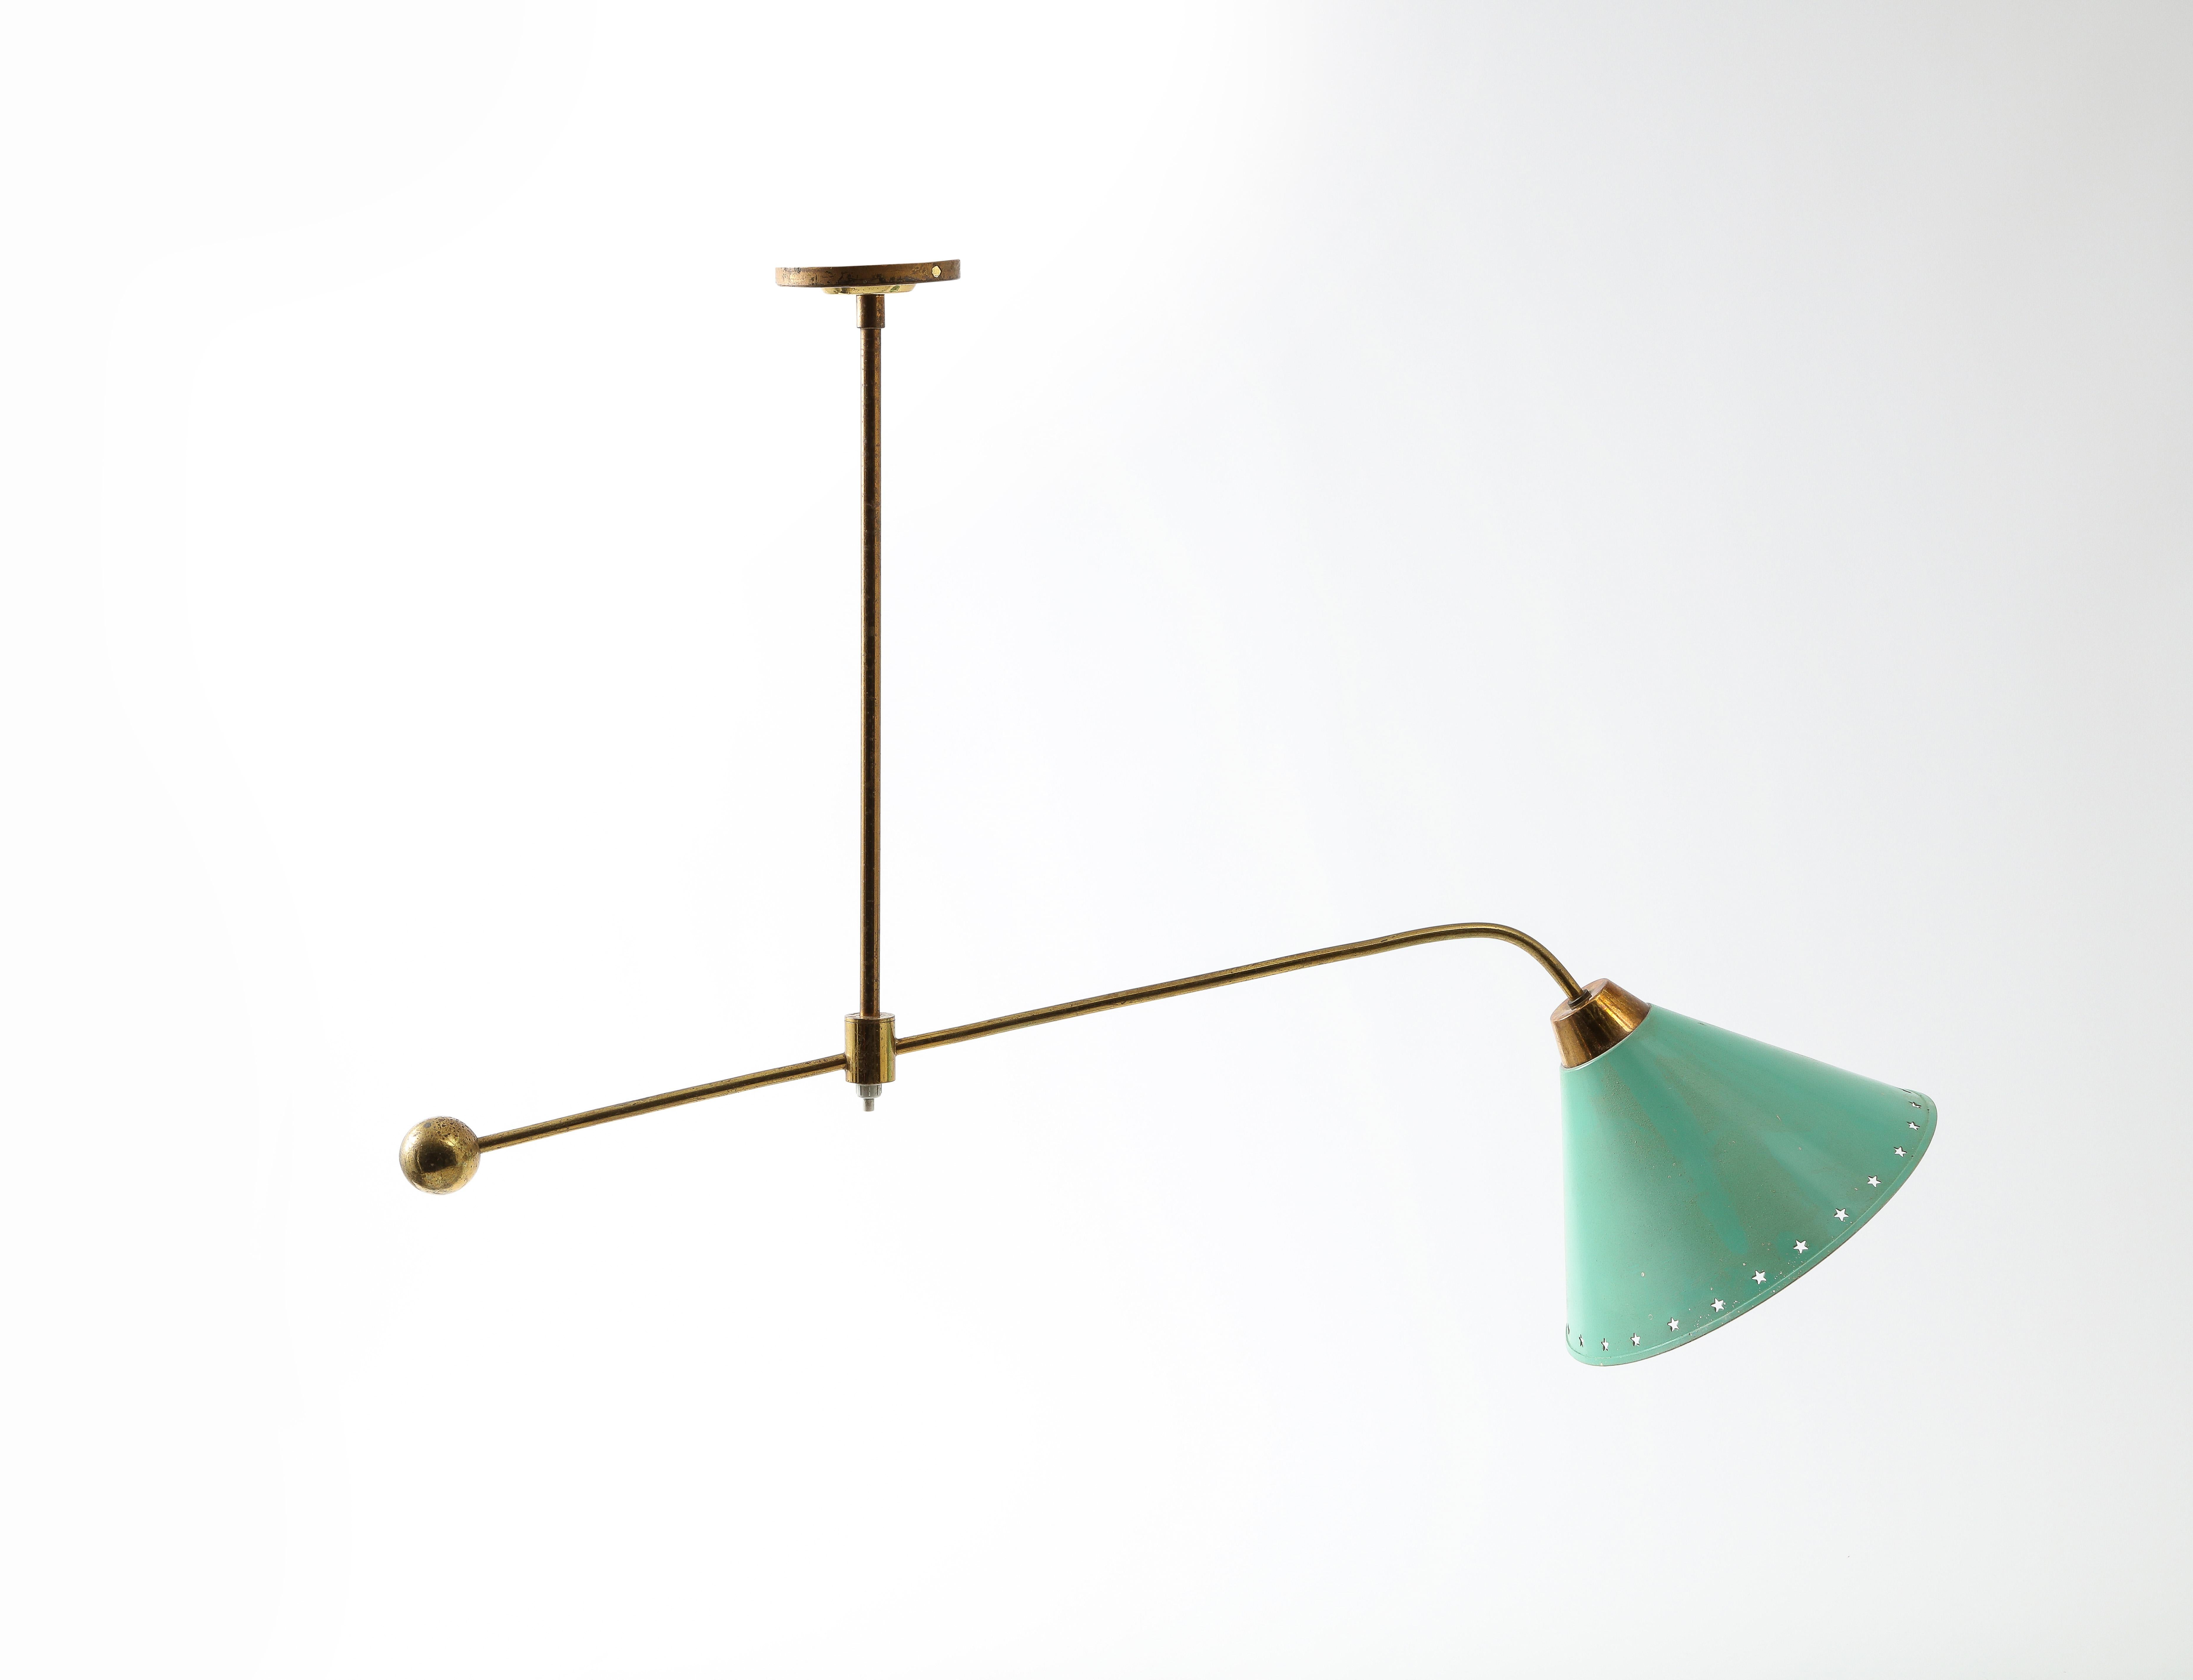 Aluminum Arlus Brass Asymmetrical Ceiling Fixture with Green Shade, France 1960's For Sale